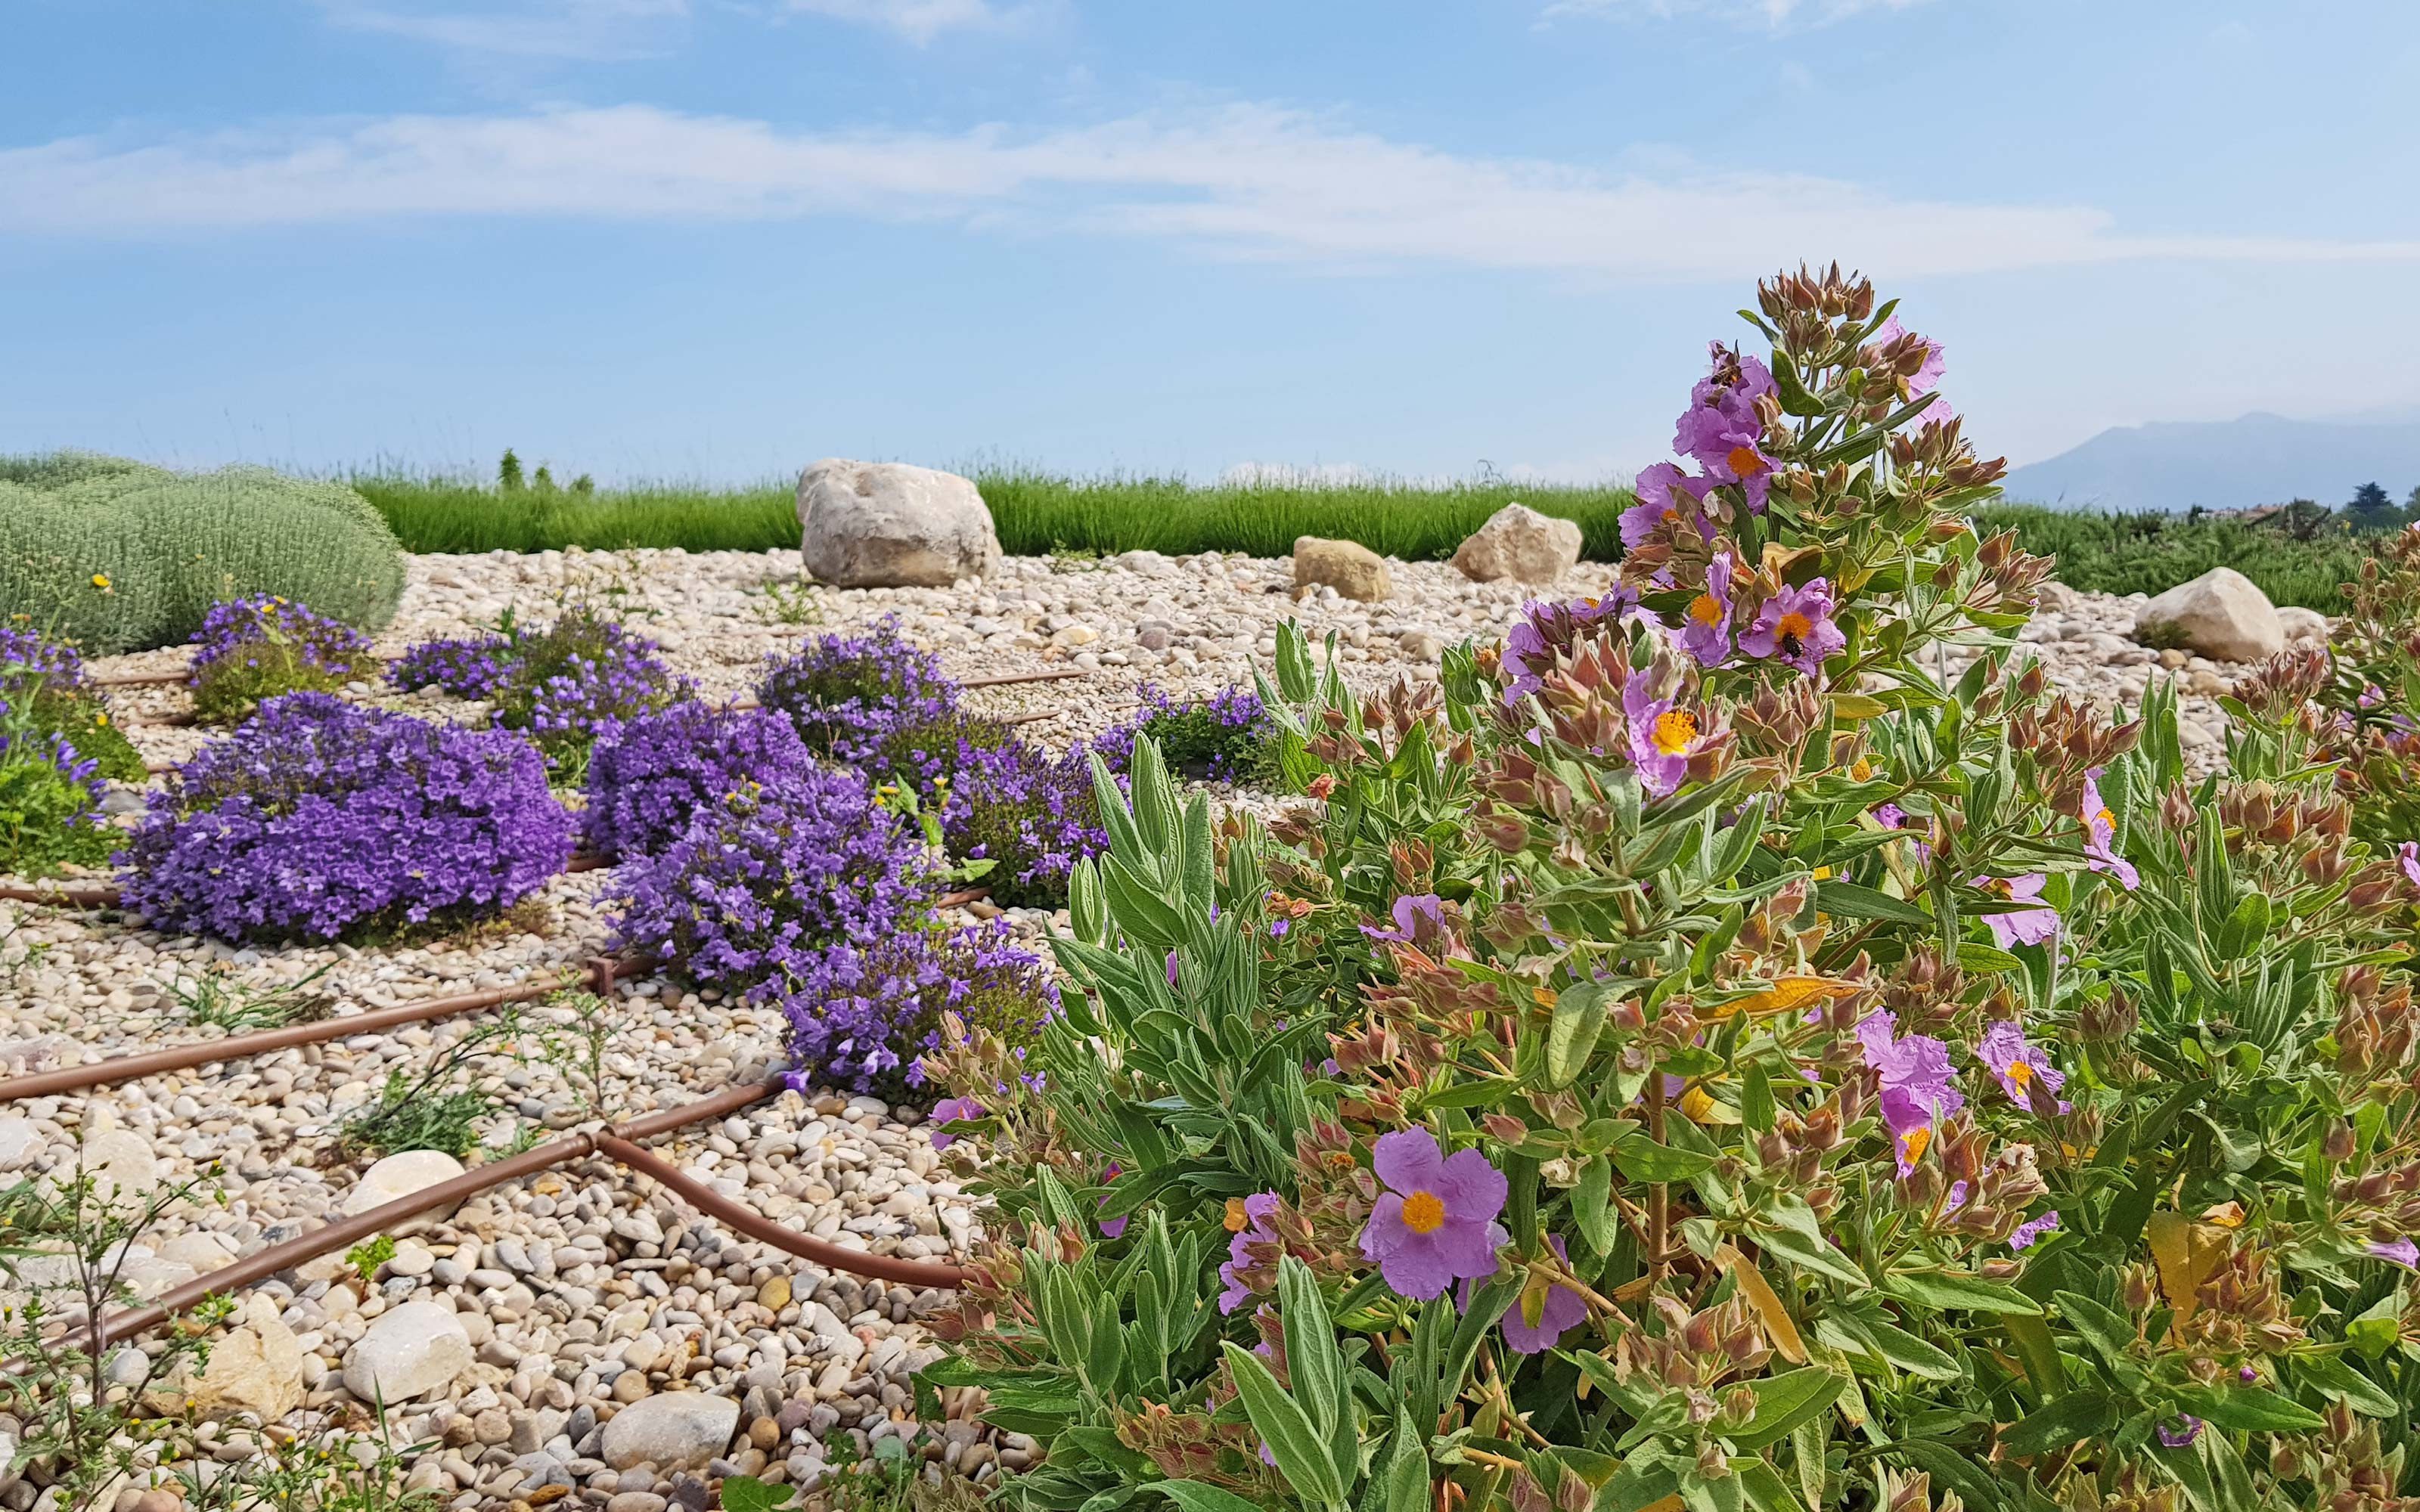 Pitched green roof with irrigation pipes, purple and pink flowers